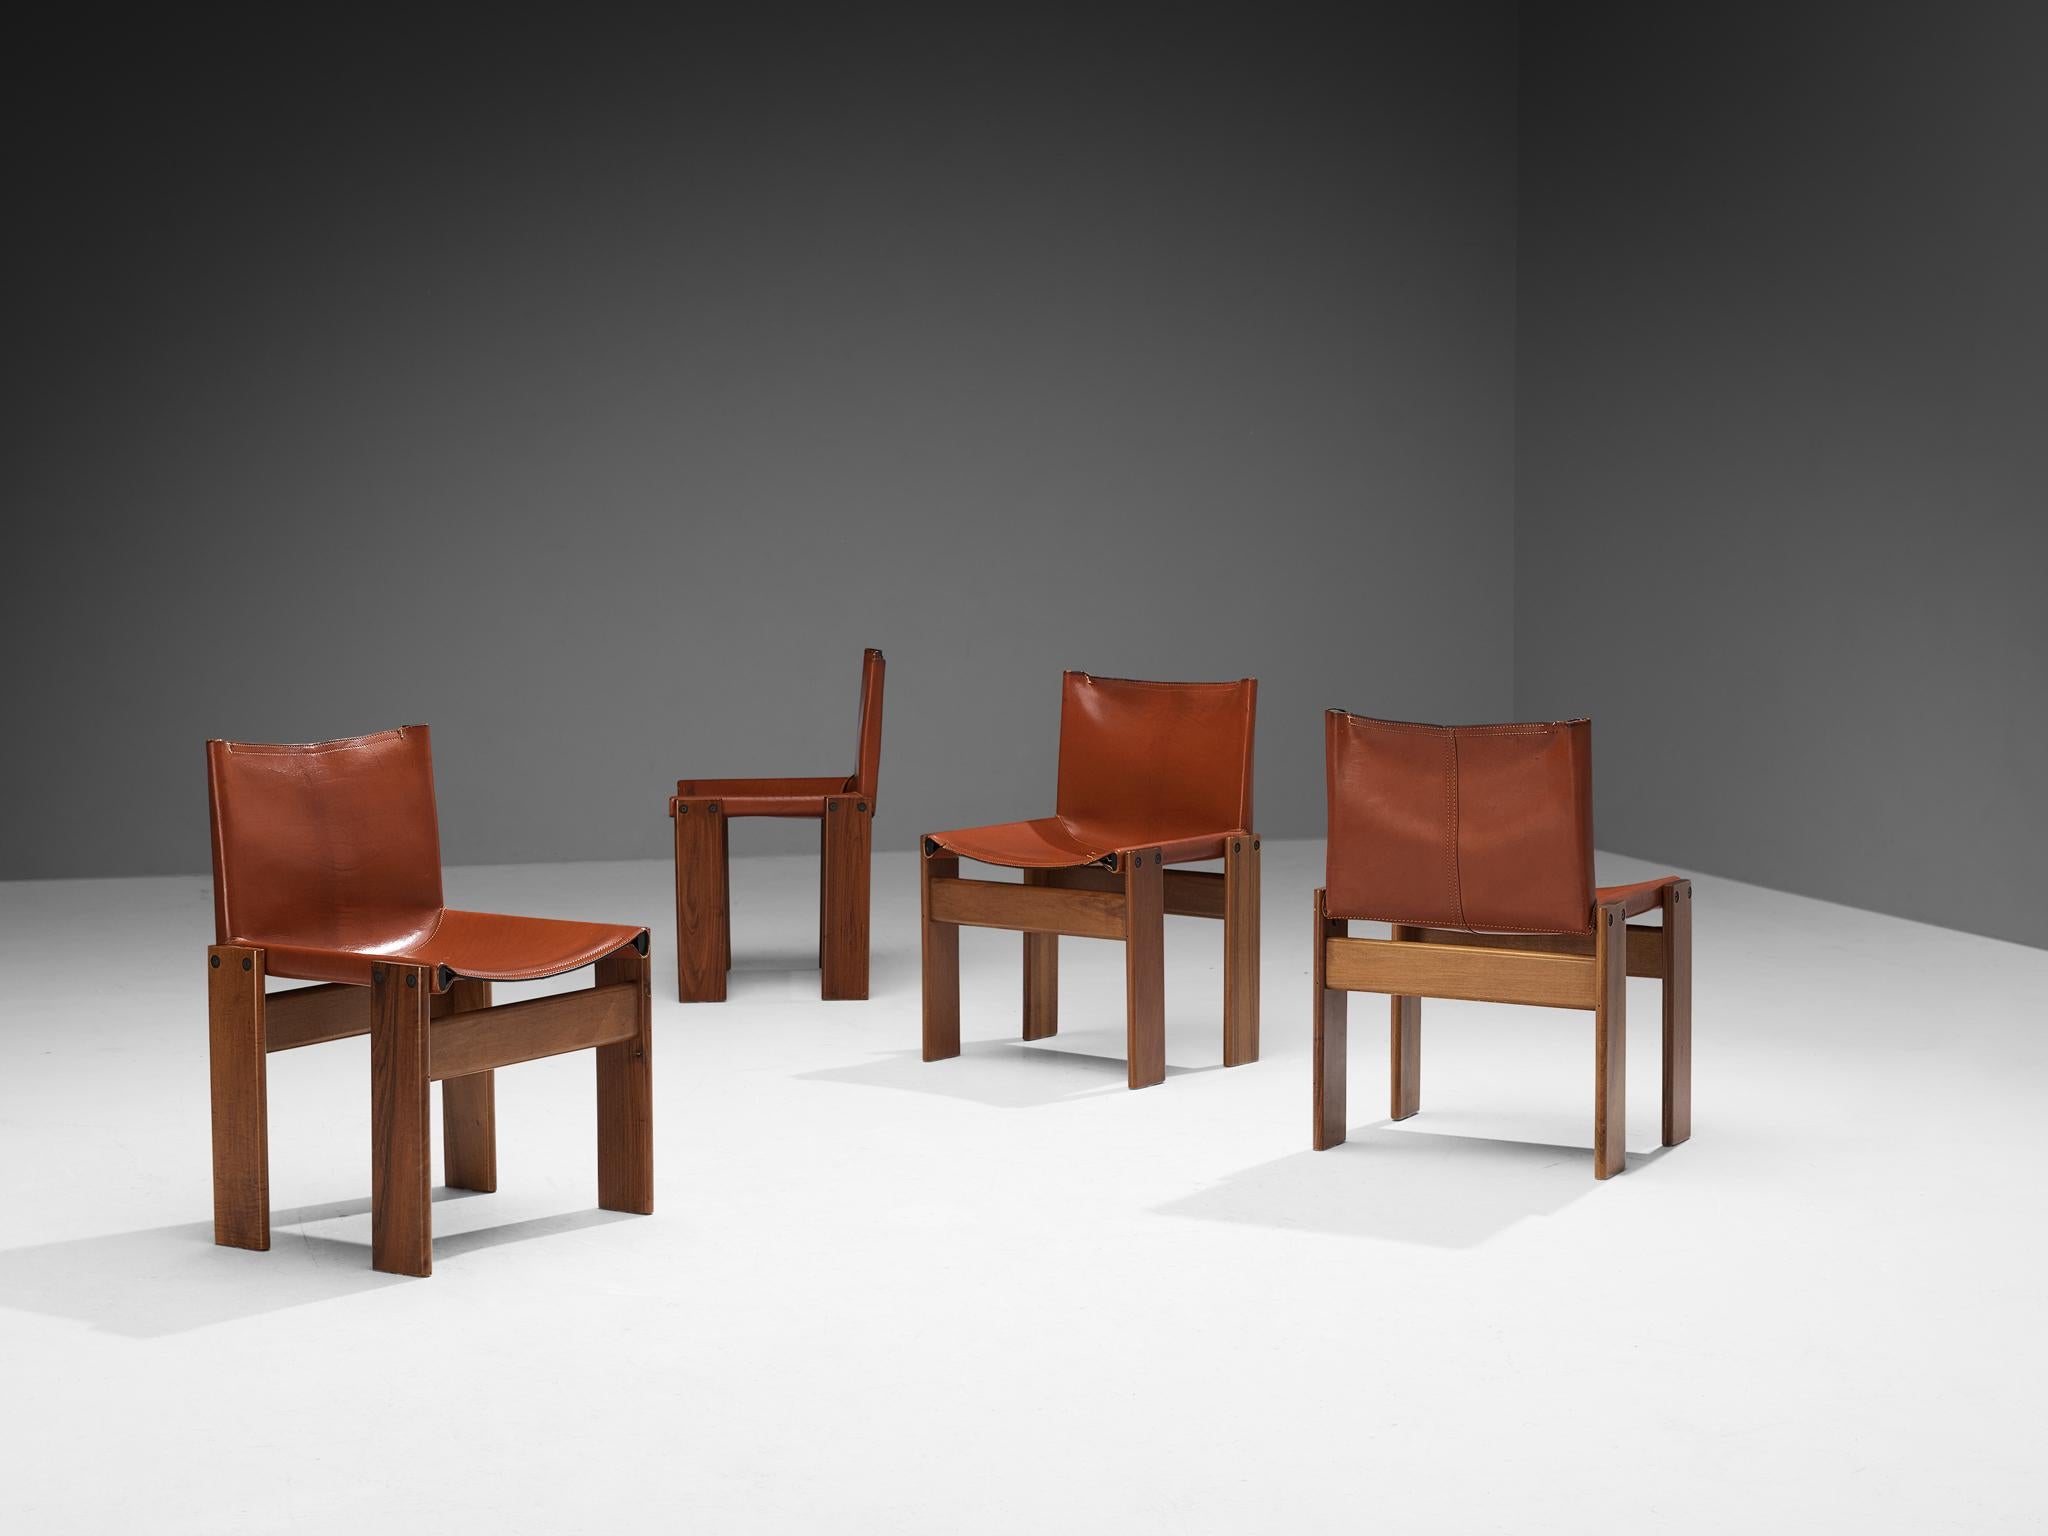 Afra & Tobia Scarpa for Molteni, set of four 'Monk' dining chairs, walnut, leather, Italy, 1974.

The deep red leather shows beautiful patina and forms a striking combination with the walnut wood. Interesting is the 'flat' shape of this chair